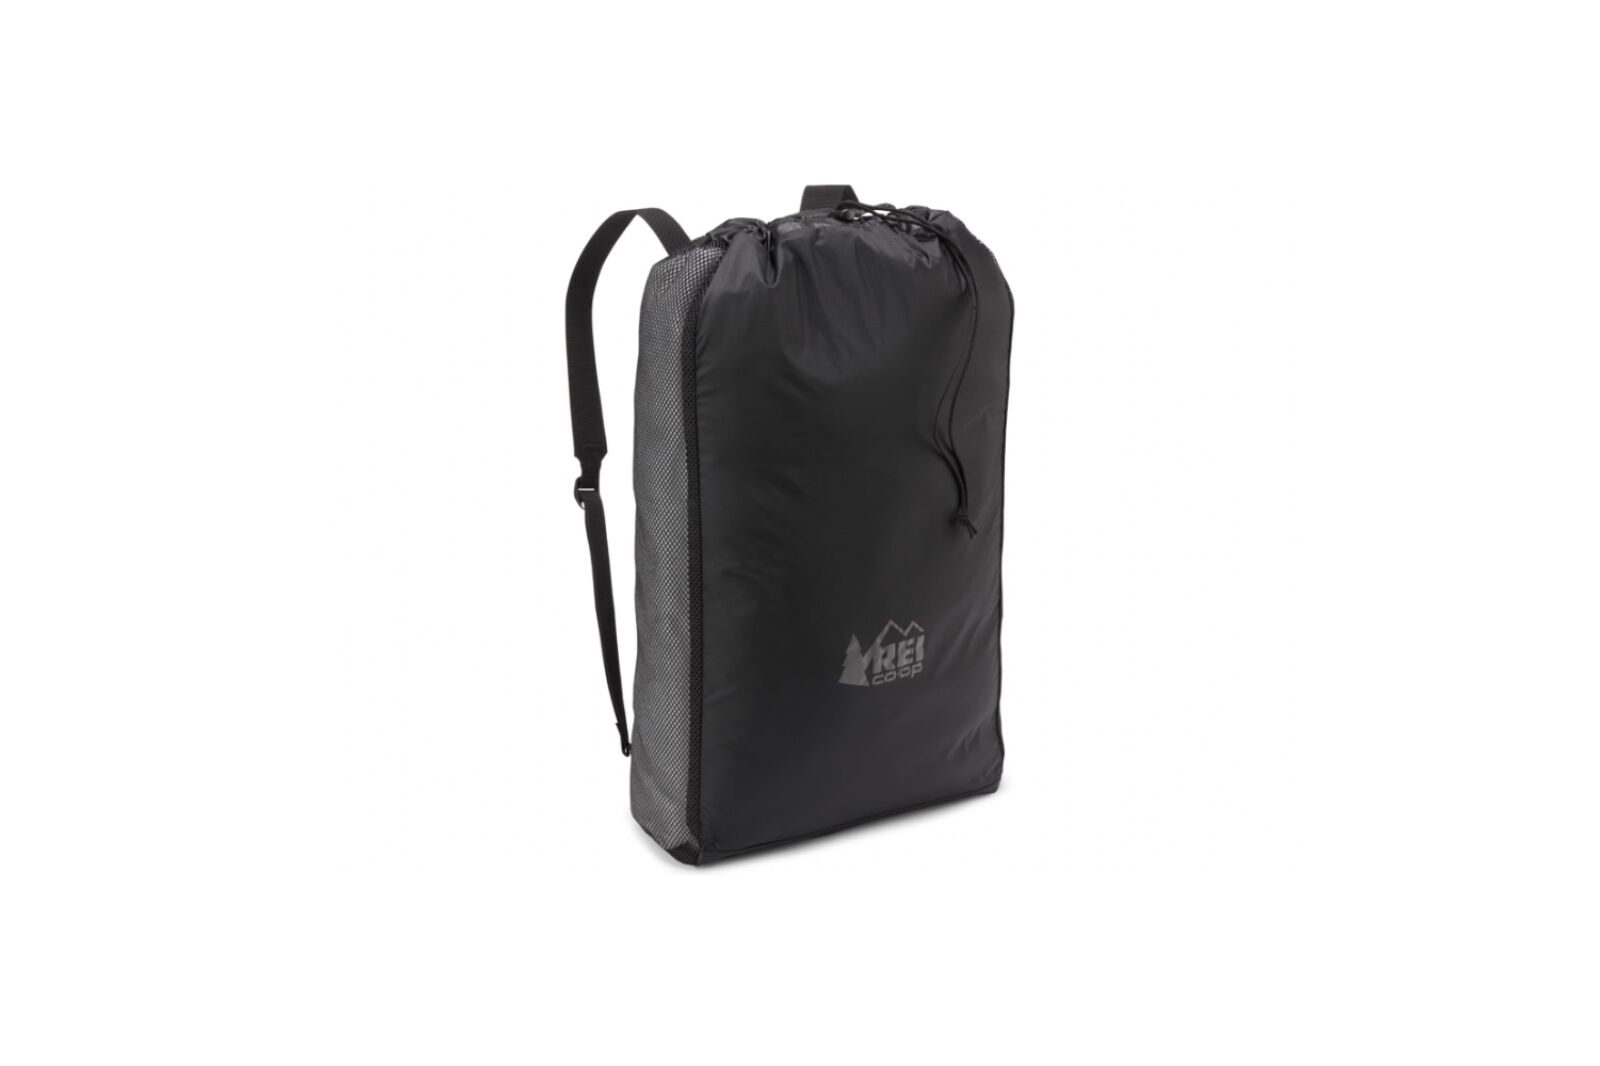 REI Co-op laundry pack an essential packing organizer